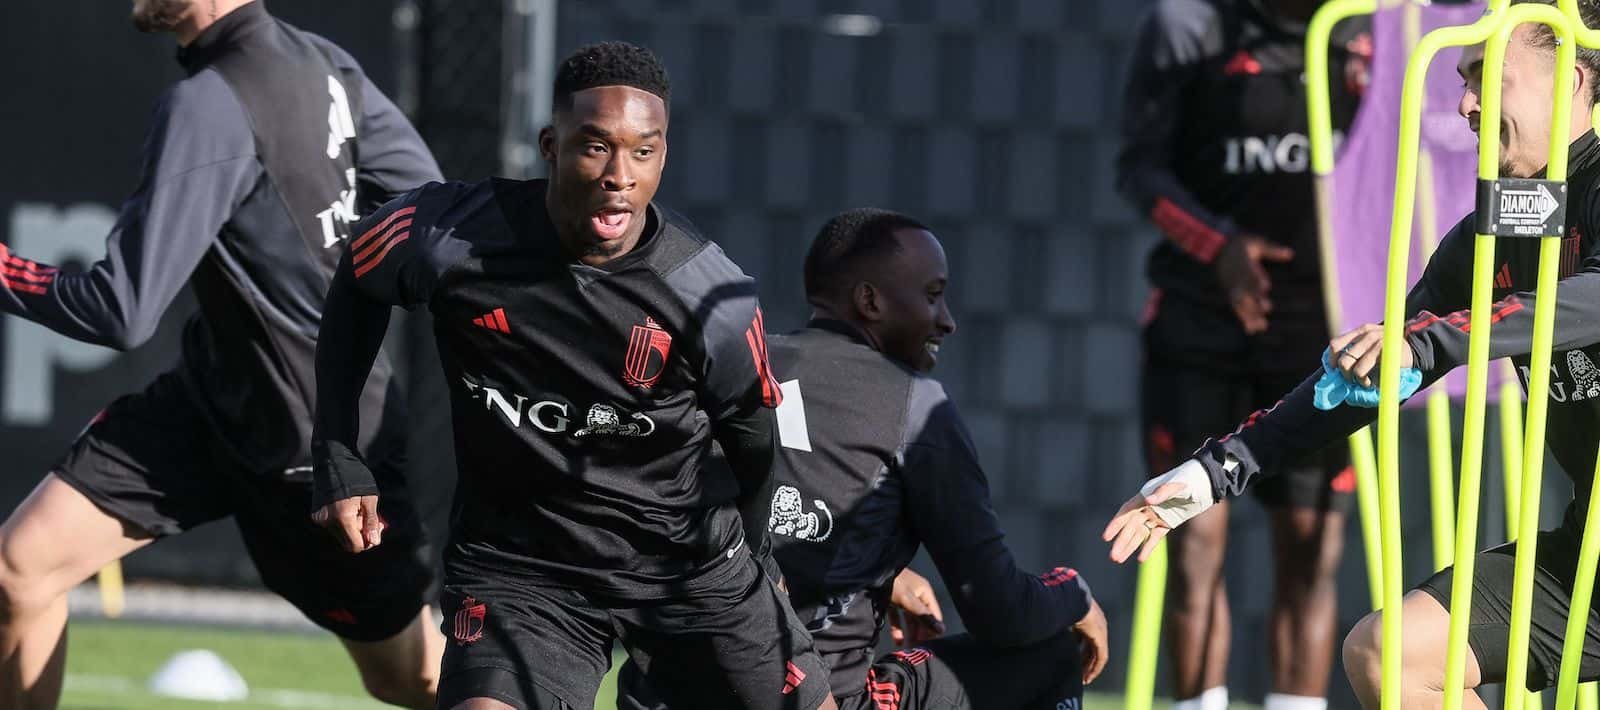 Manchester United target Mandela Keita will likely leave Royal Antwerp according to CEO – Man United News And Transfer News